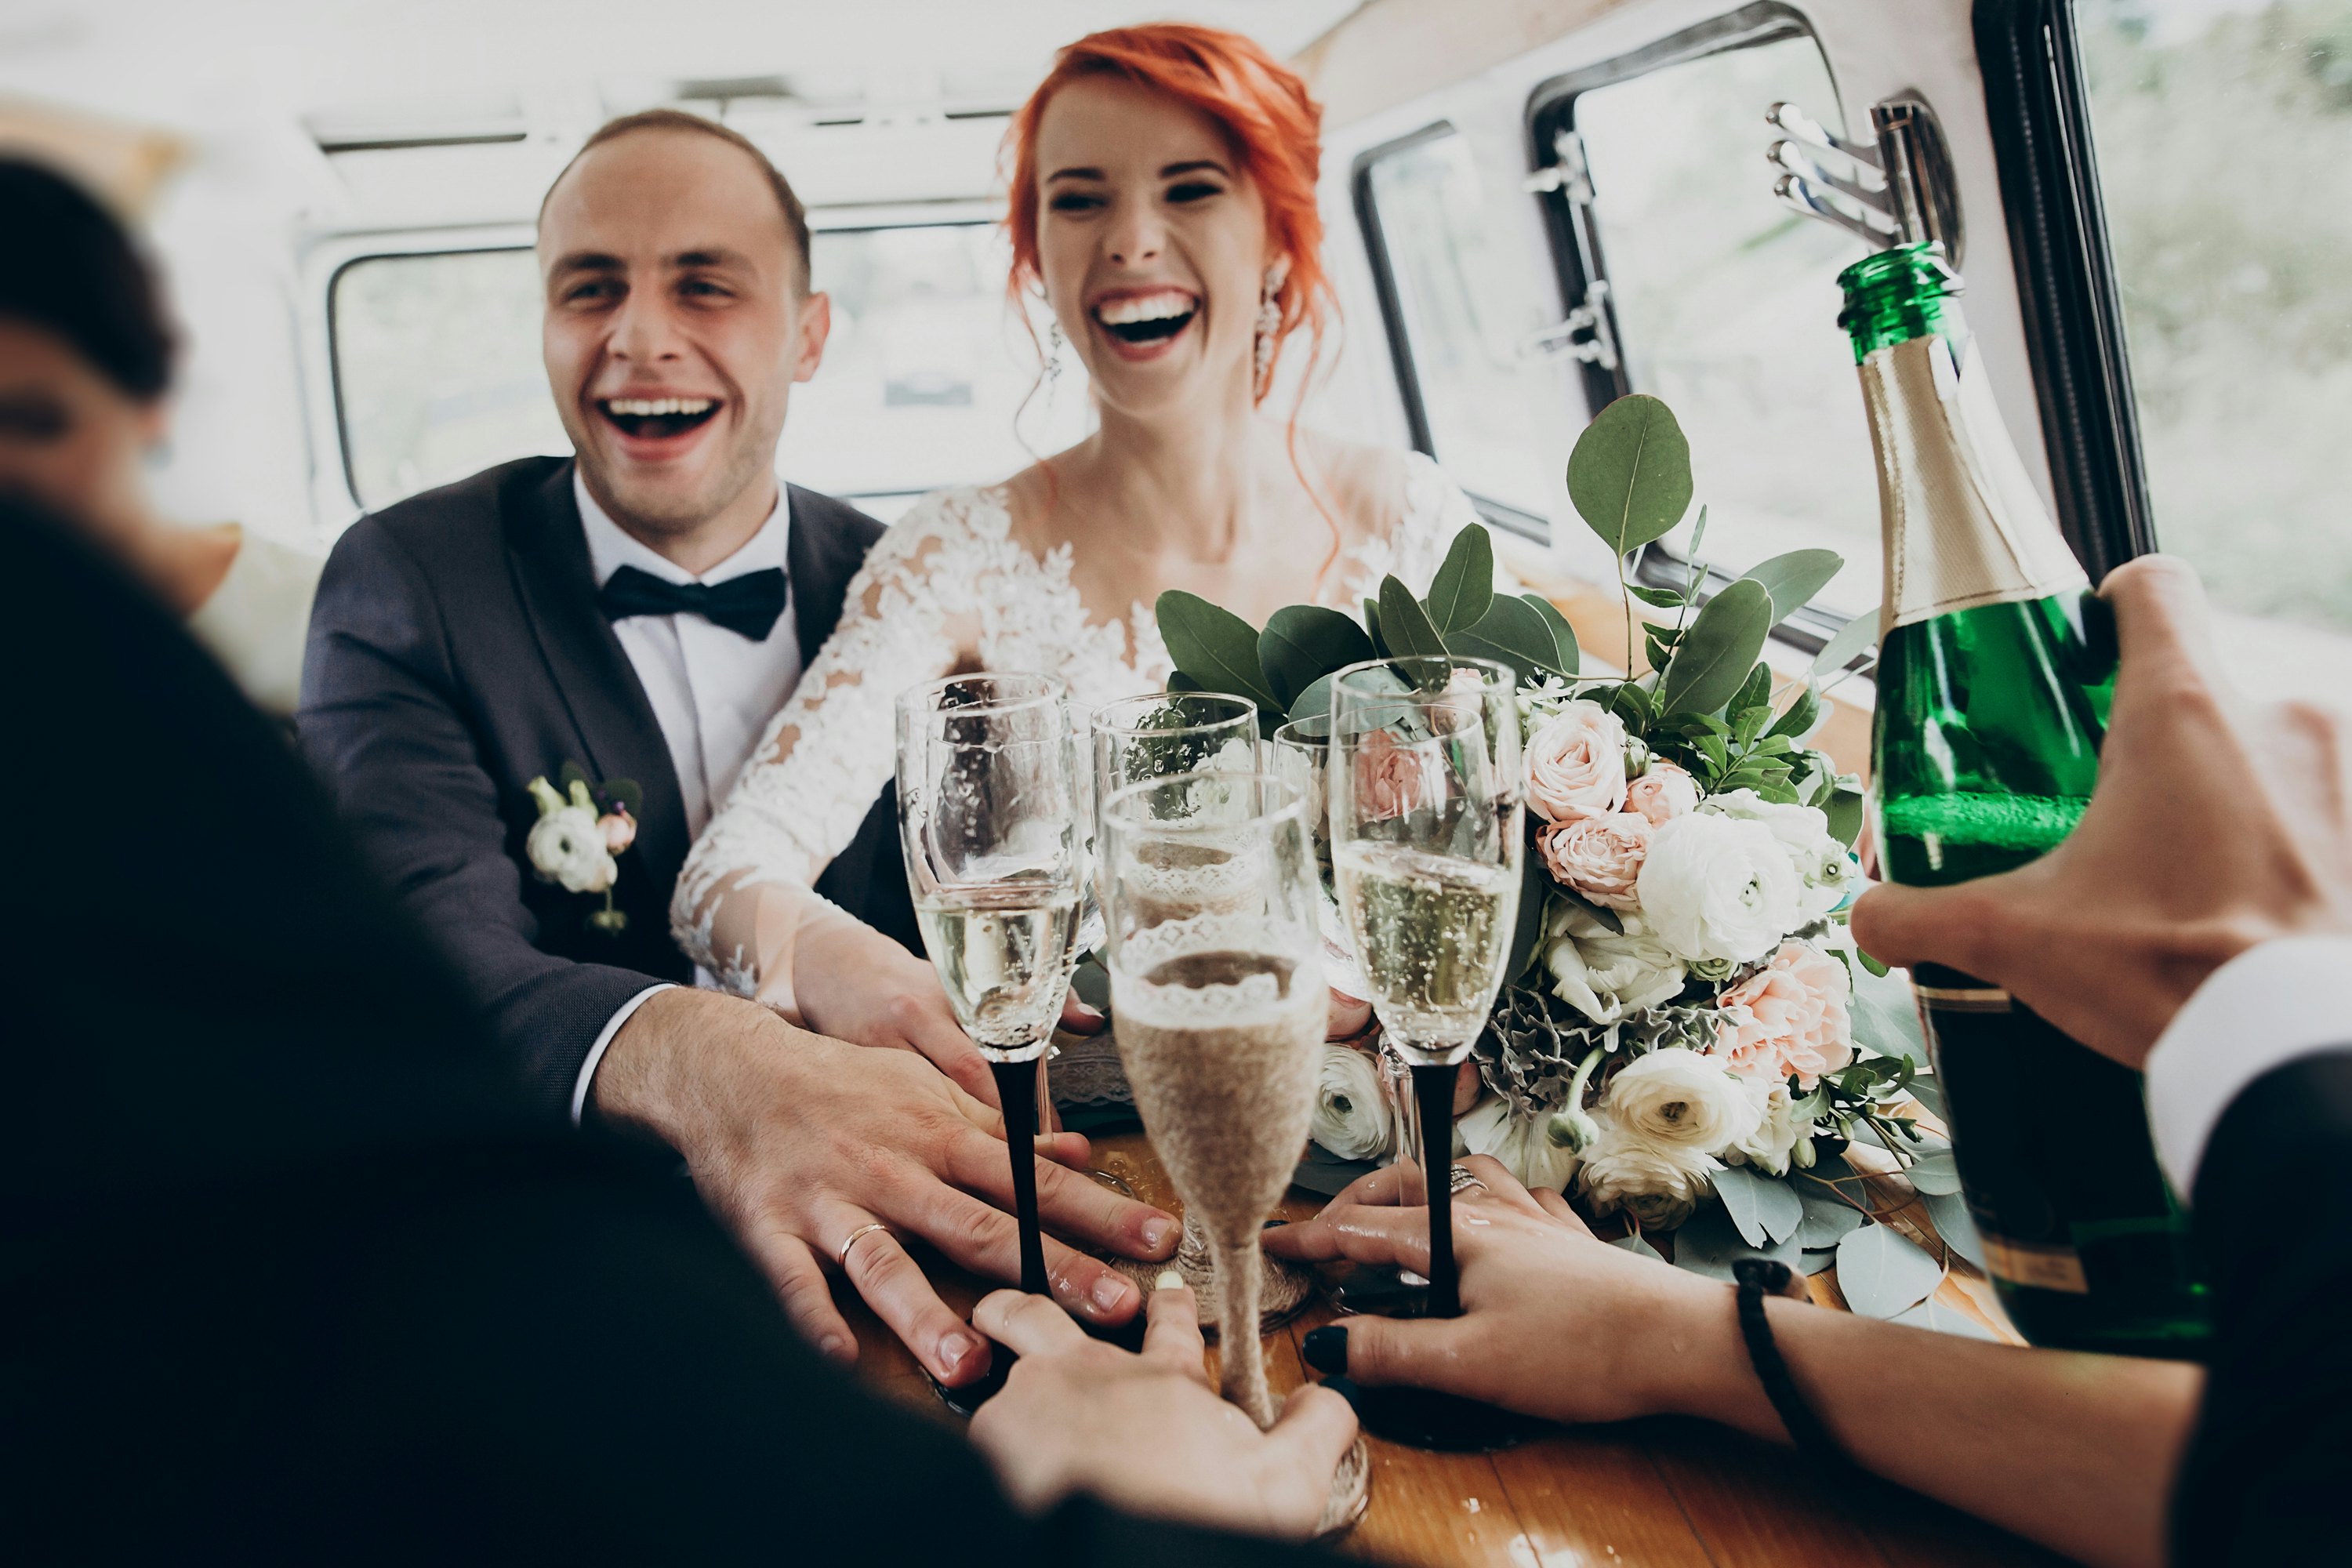 38 Wedding Guest Captions For Instagram To Celebrate The Big Day